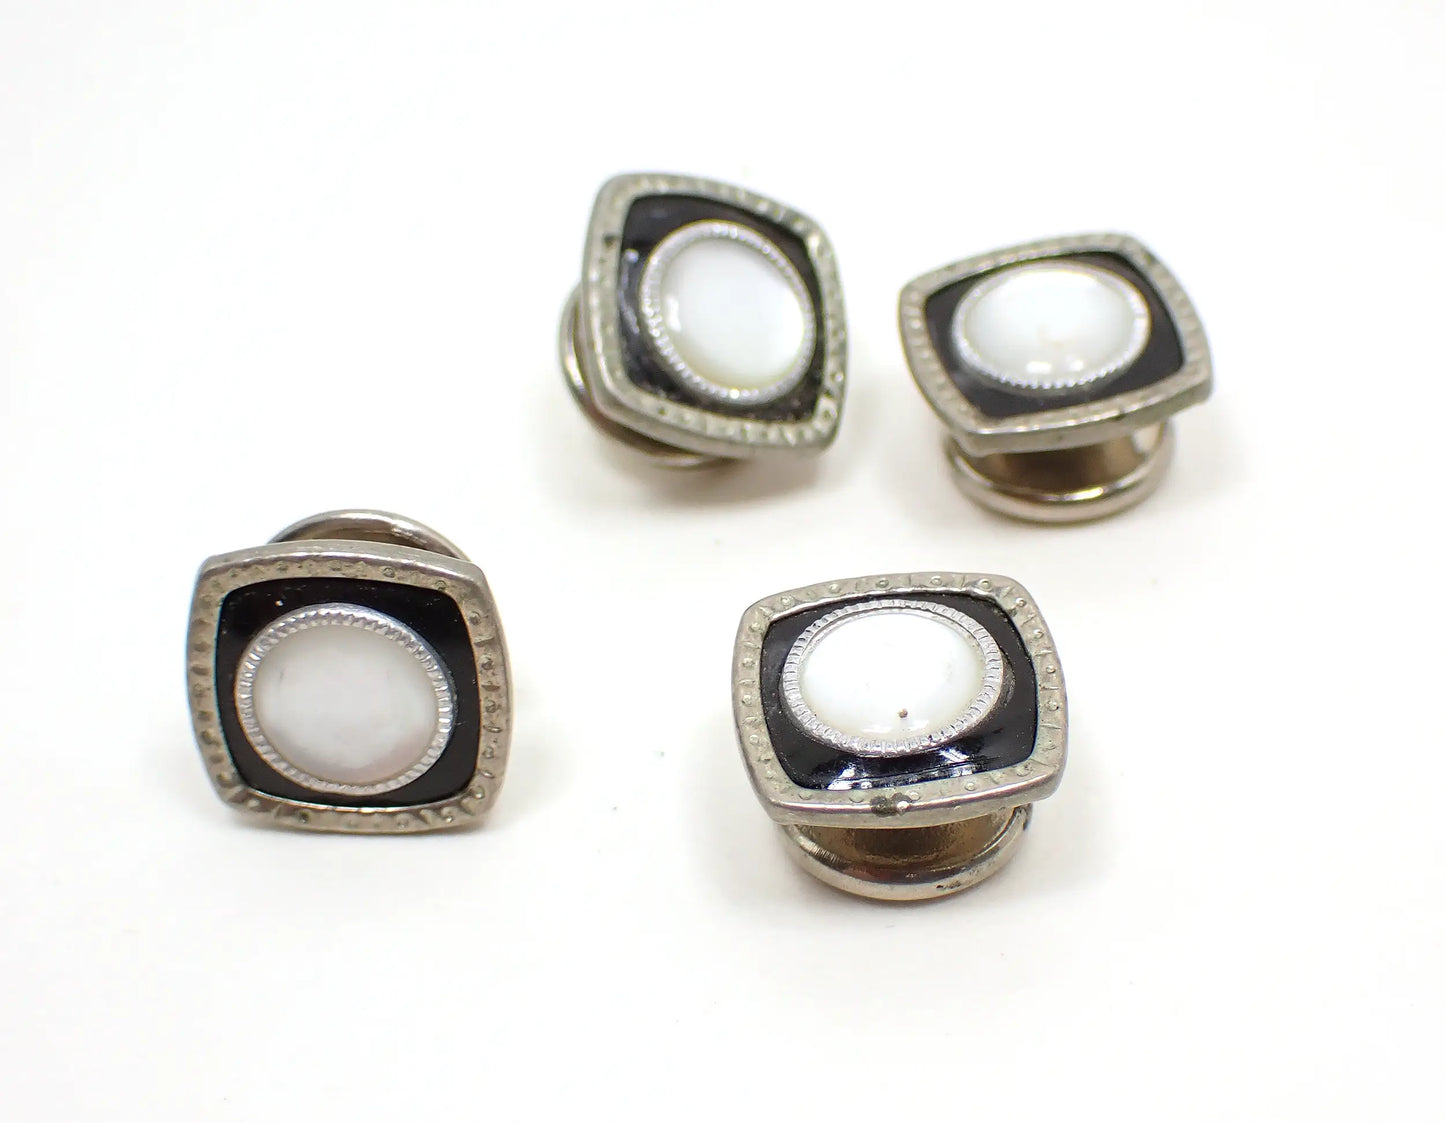 Art Deco Onyx and Mother of Pearl Vintage Cufflinks, Snap Link Cuff Links